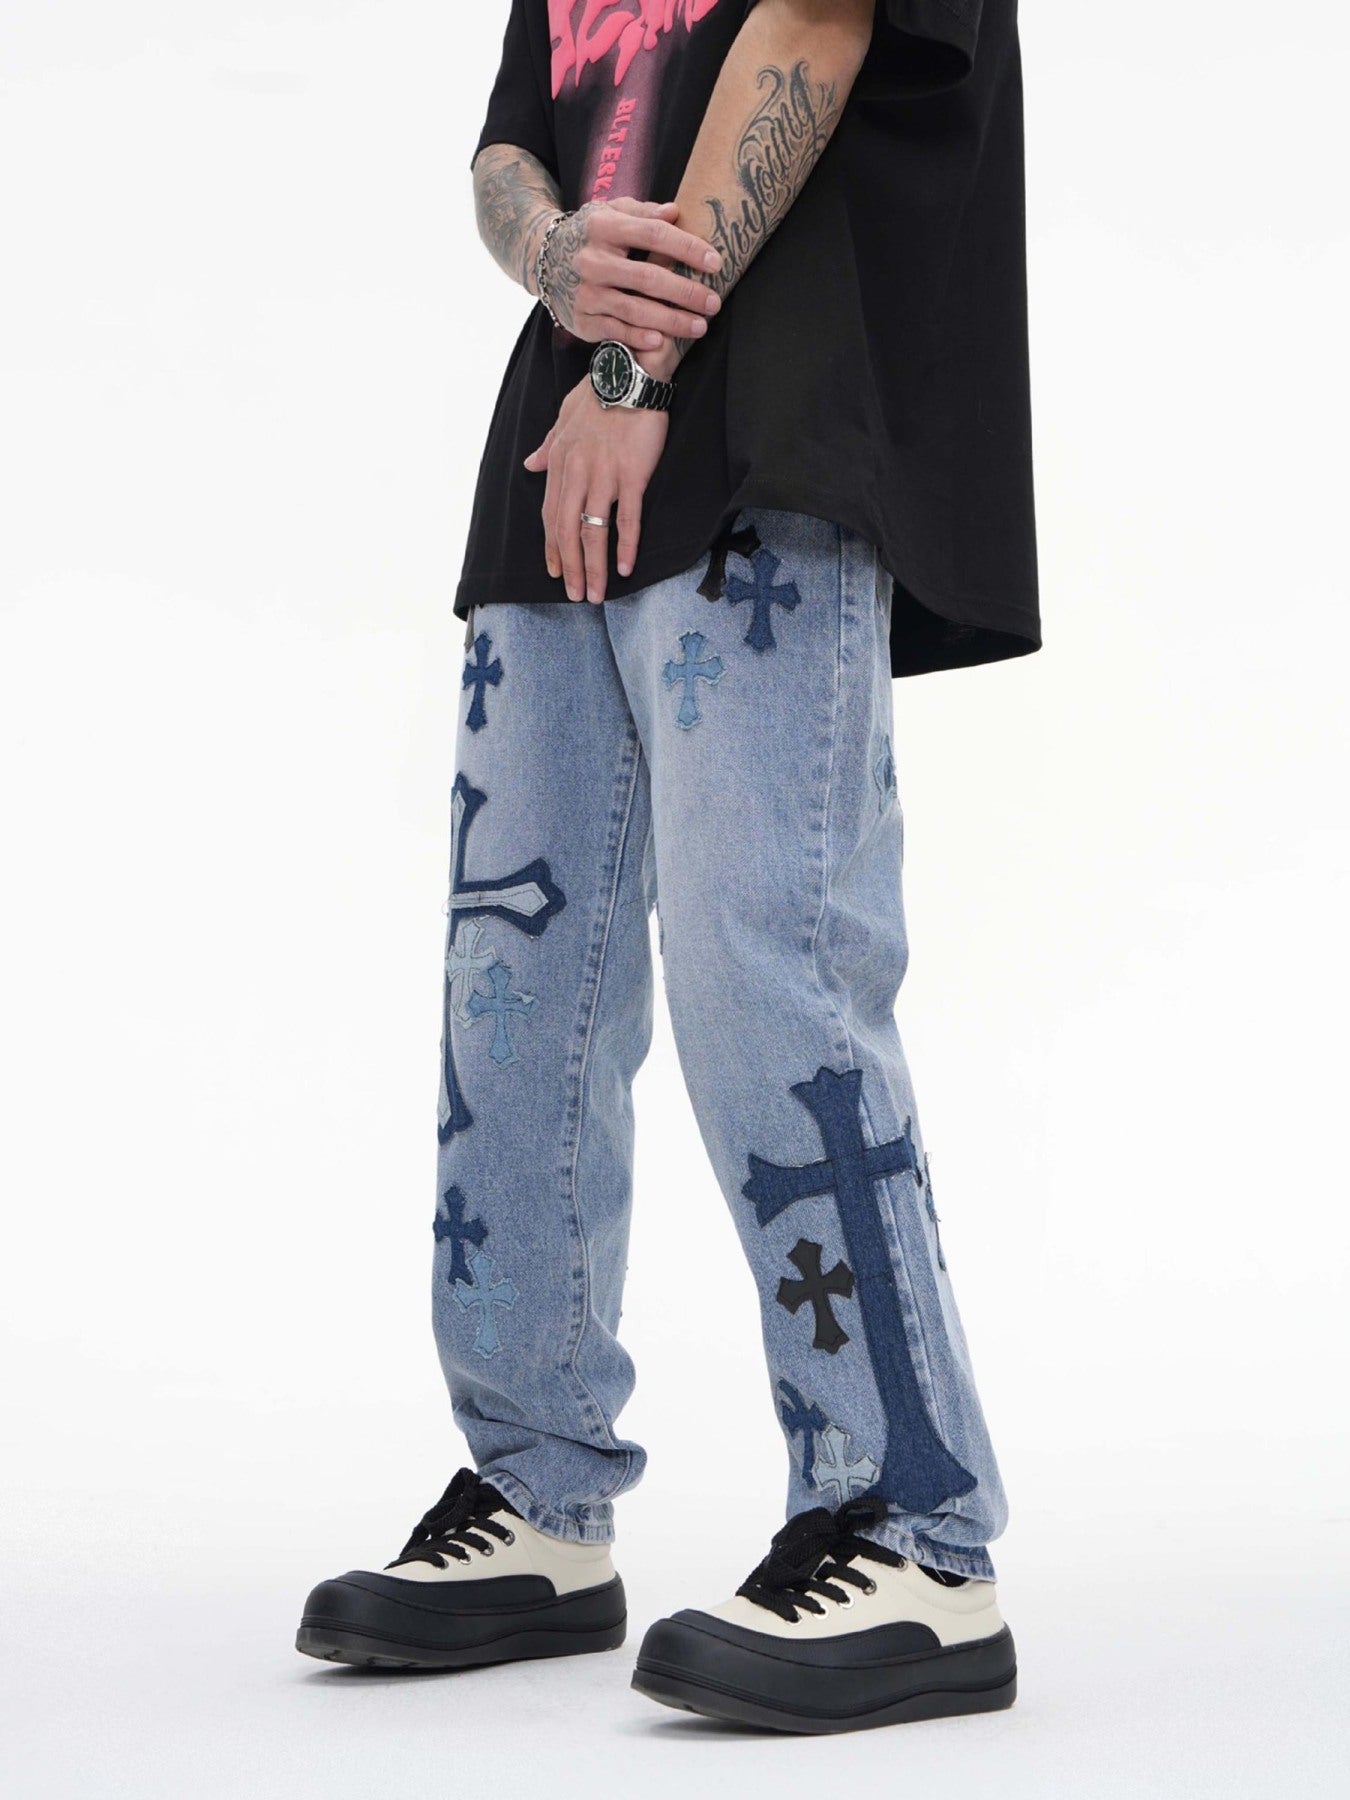 The Supermade Applique Embroidered Jeans